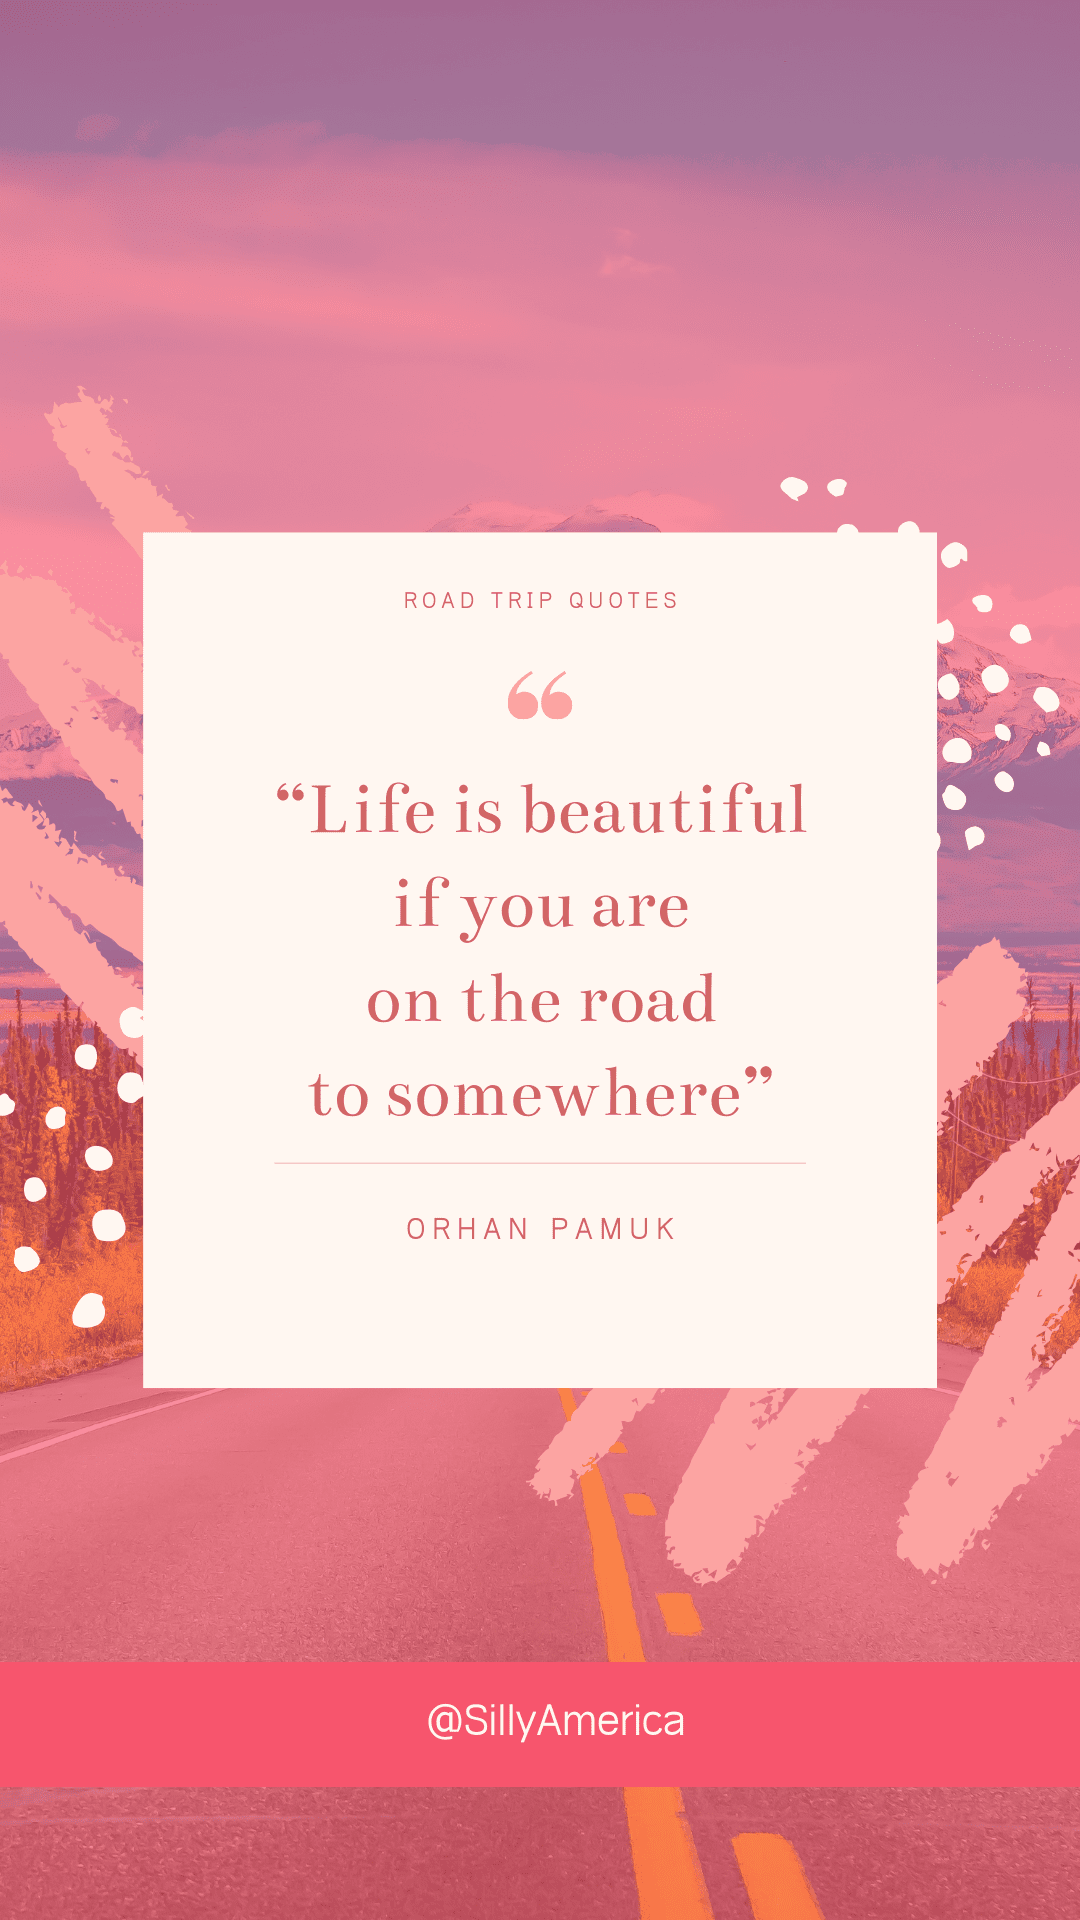 Road Trip Instagram Caption Quotes - “Life is beautiful if you are on the road to somewhere” Orhan Pamuk, The New Life